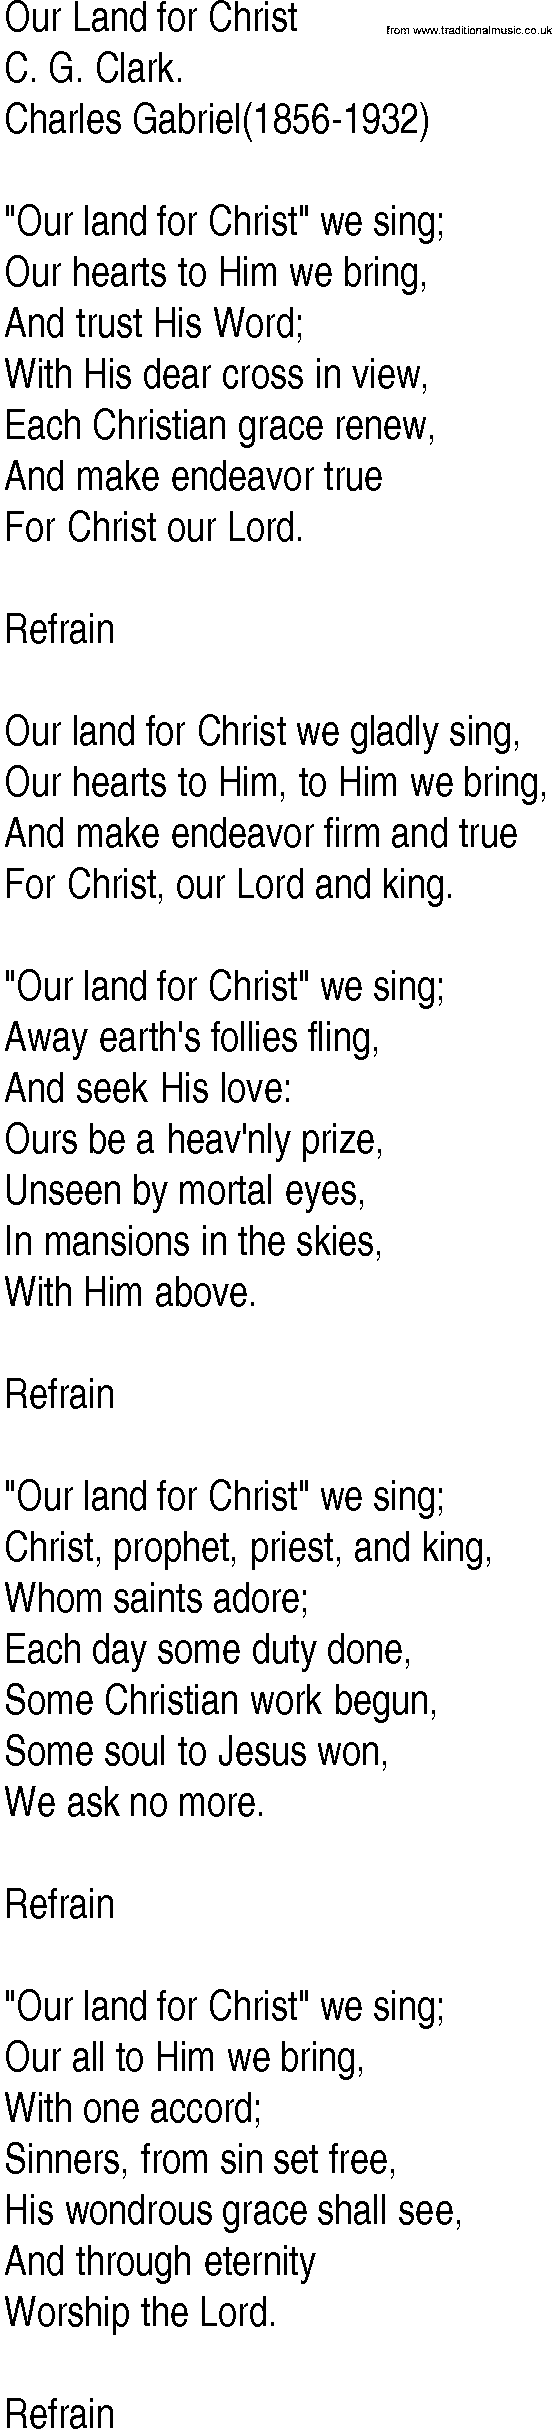 Hymn and Gospel Song: Our Land for Christ by C G Clark lyrics